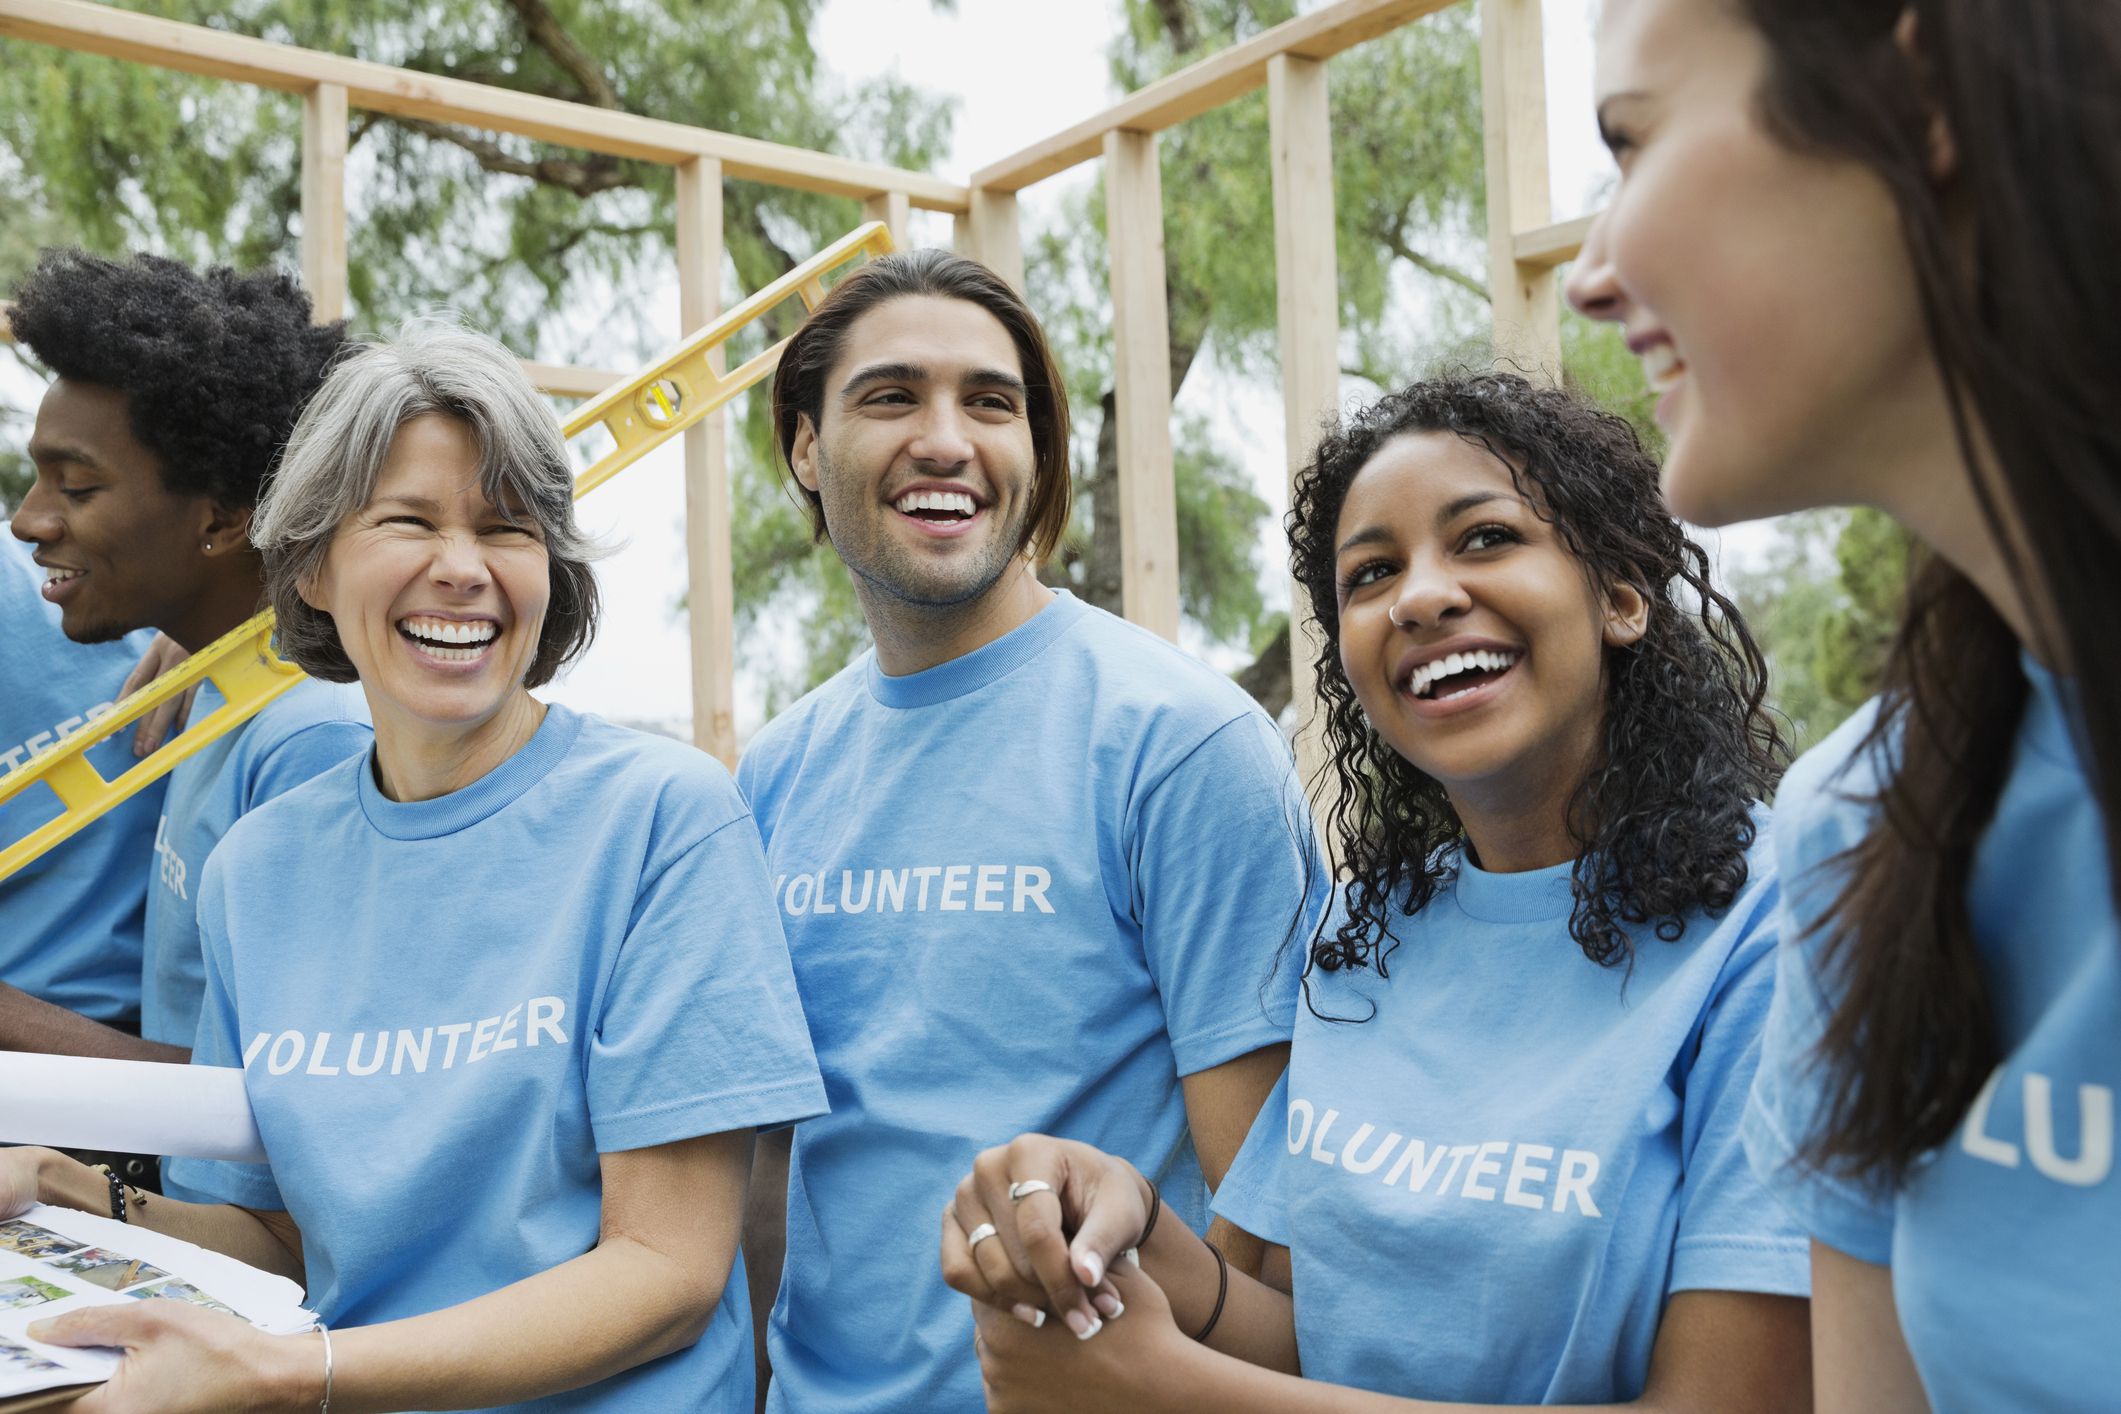 Employee volunteer event - personal time and company-sponsored events